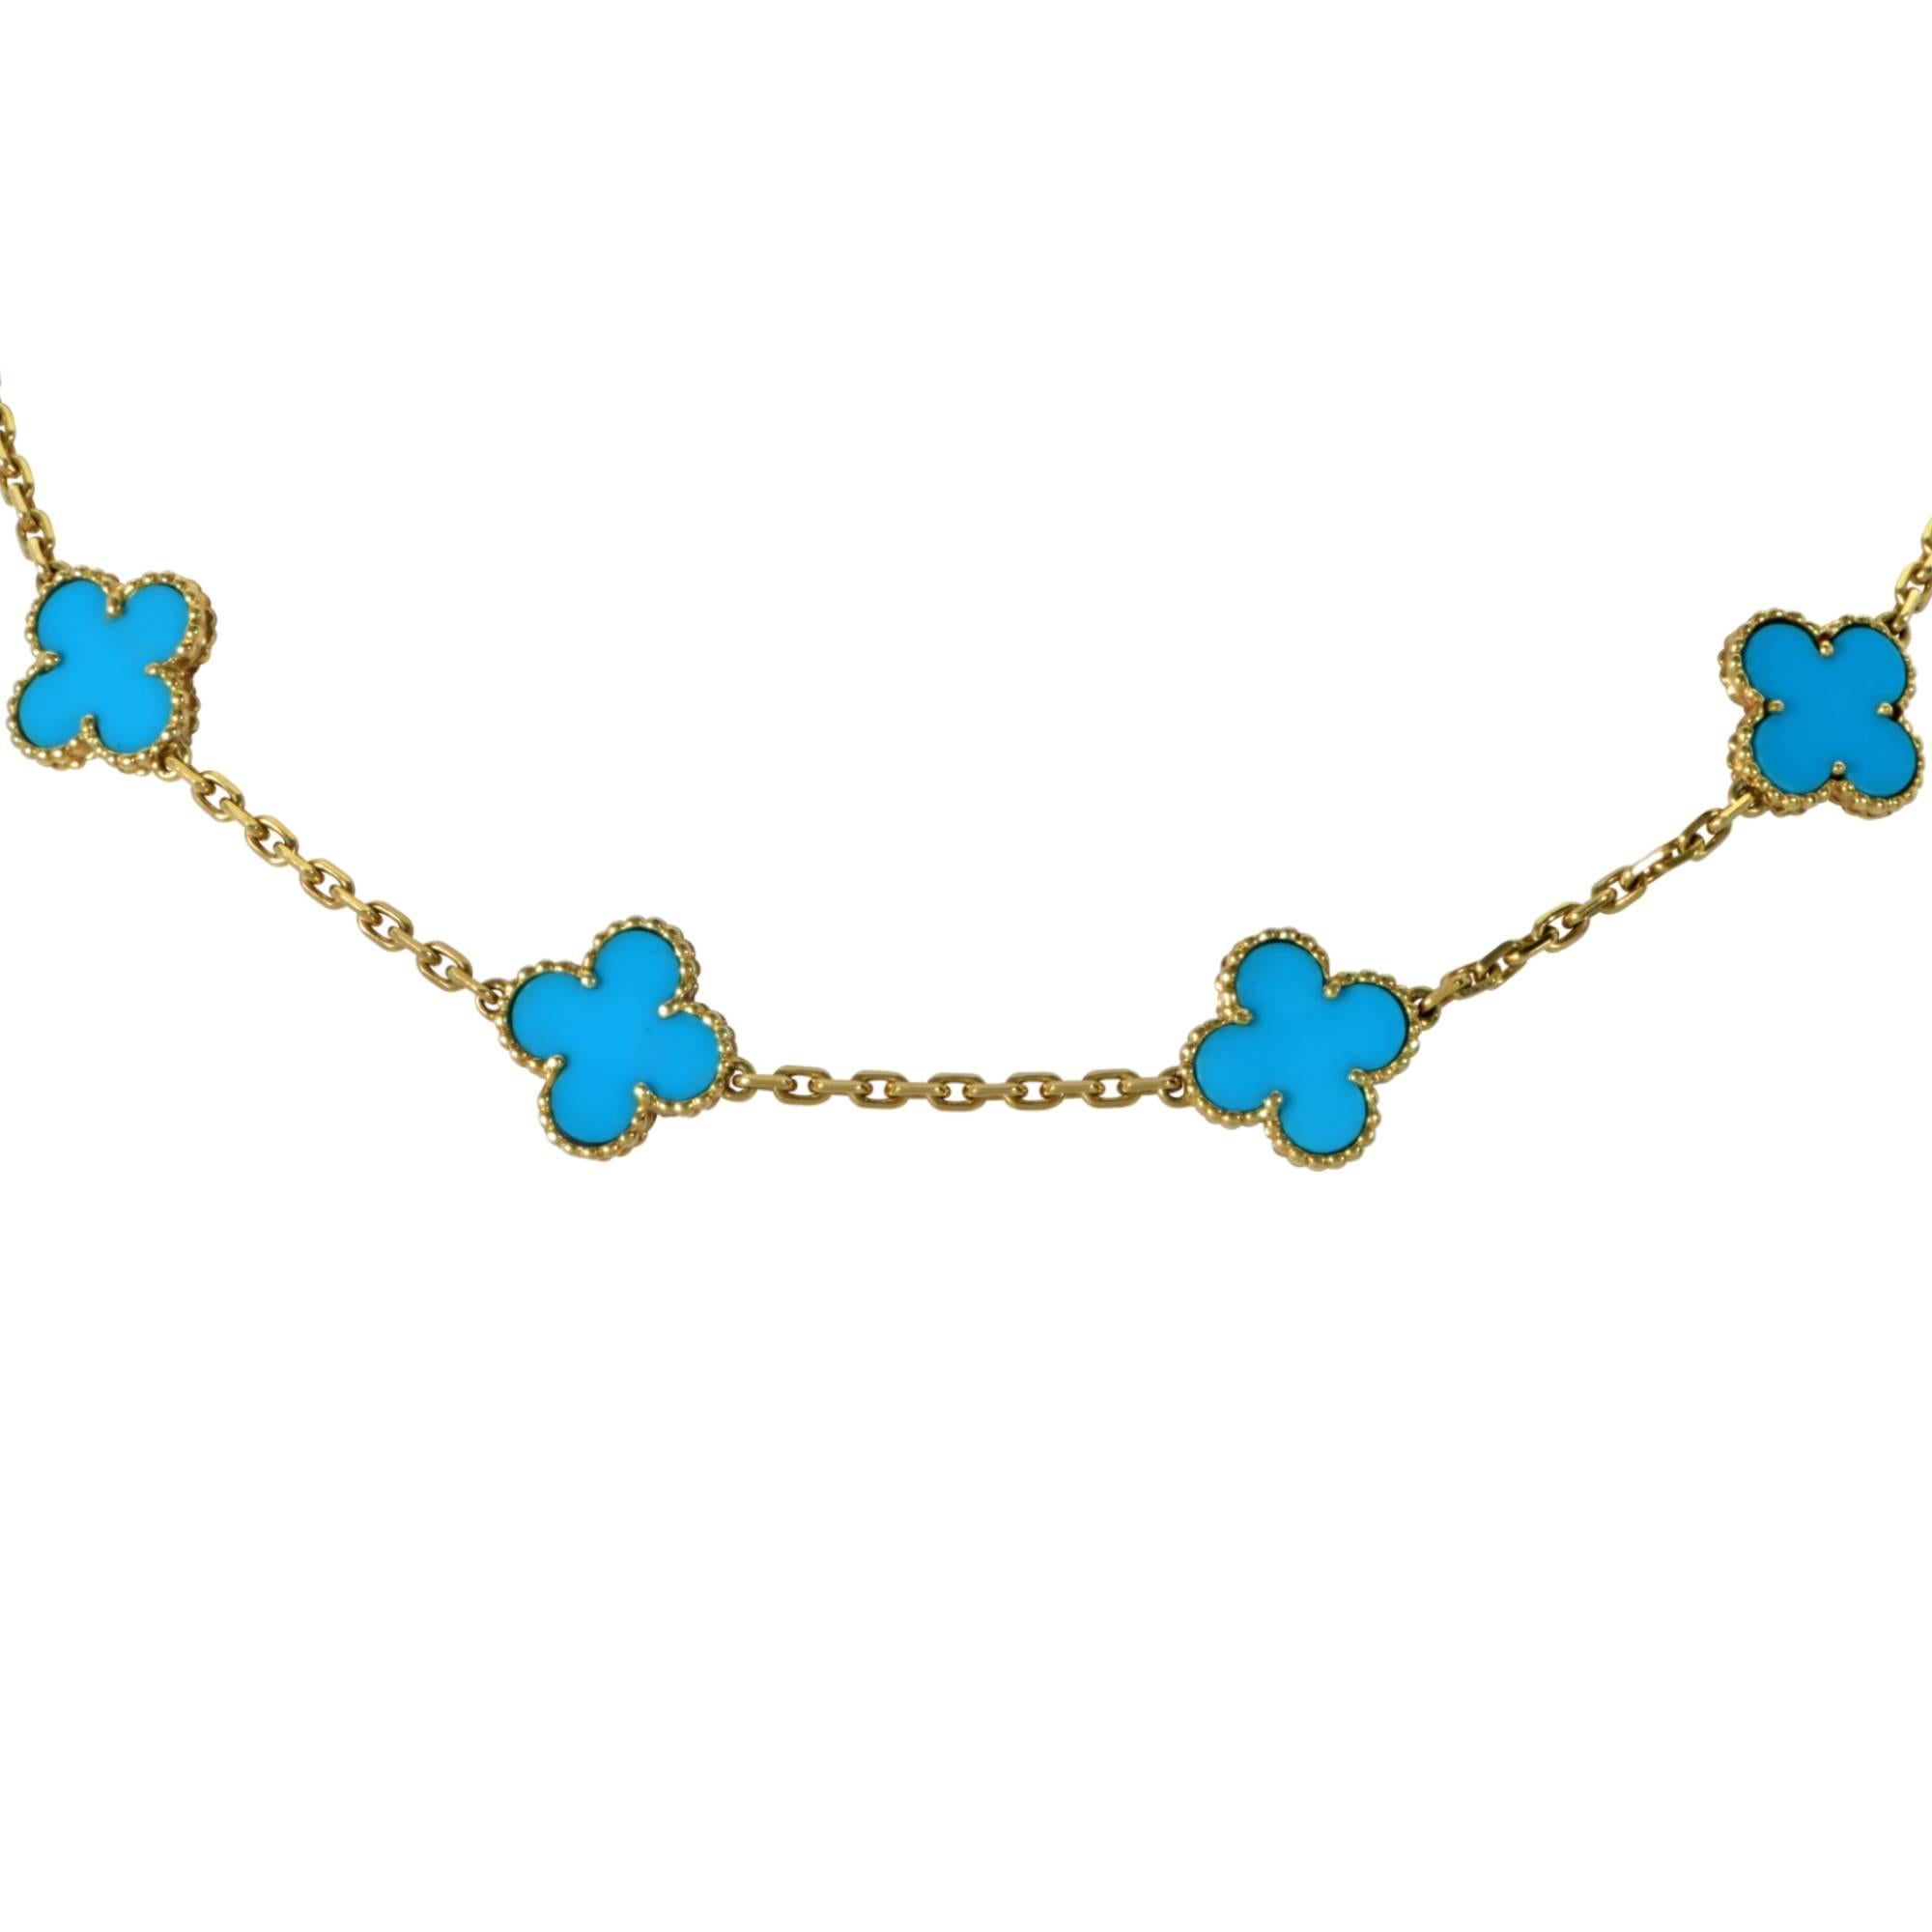 Van Cleef & Arpels 18k yellow gold vintage Alhambra necklace with 10 turquoise clover motifs.

This necklace measures 16 inches in length.
It is stamped and/or tested as 18k gold.

Our pieces are all accompanied by an appraisal performed by one